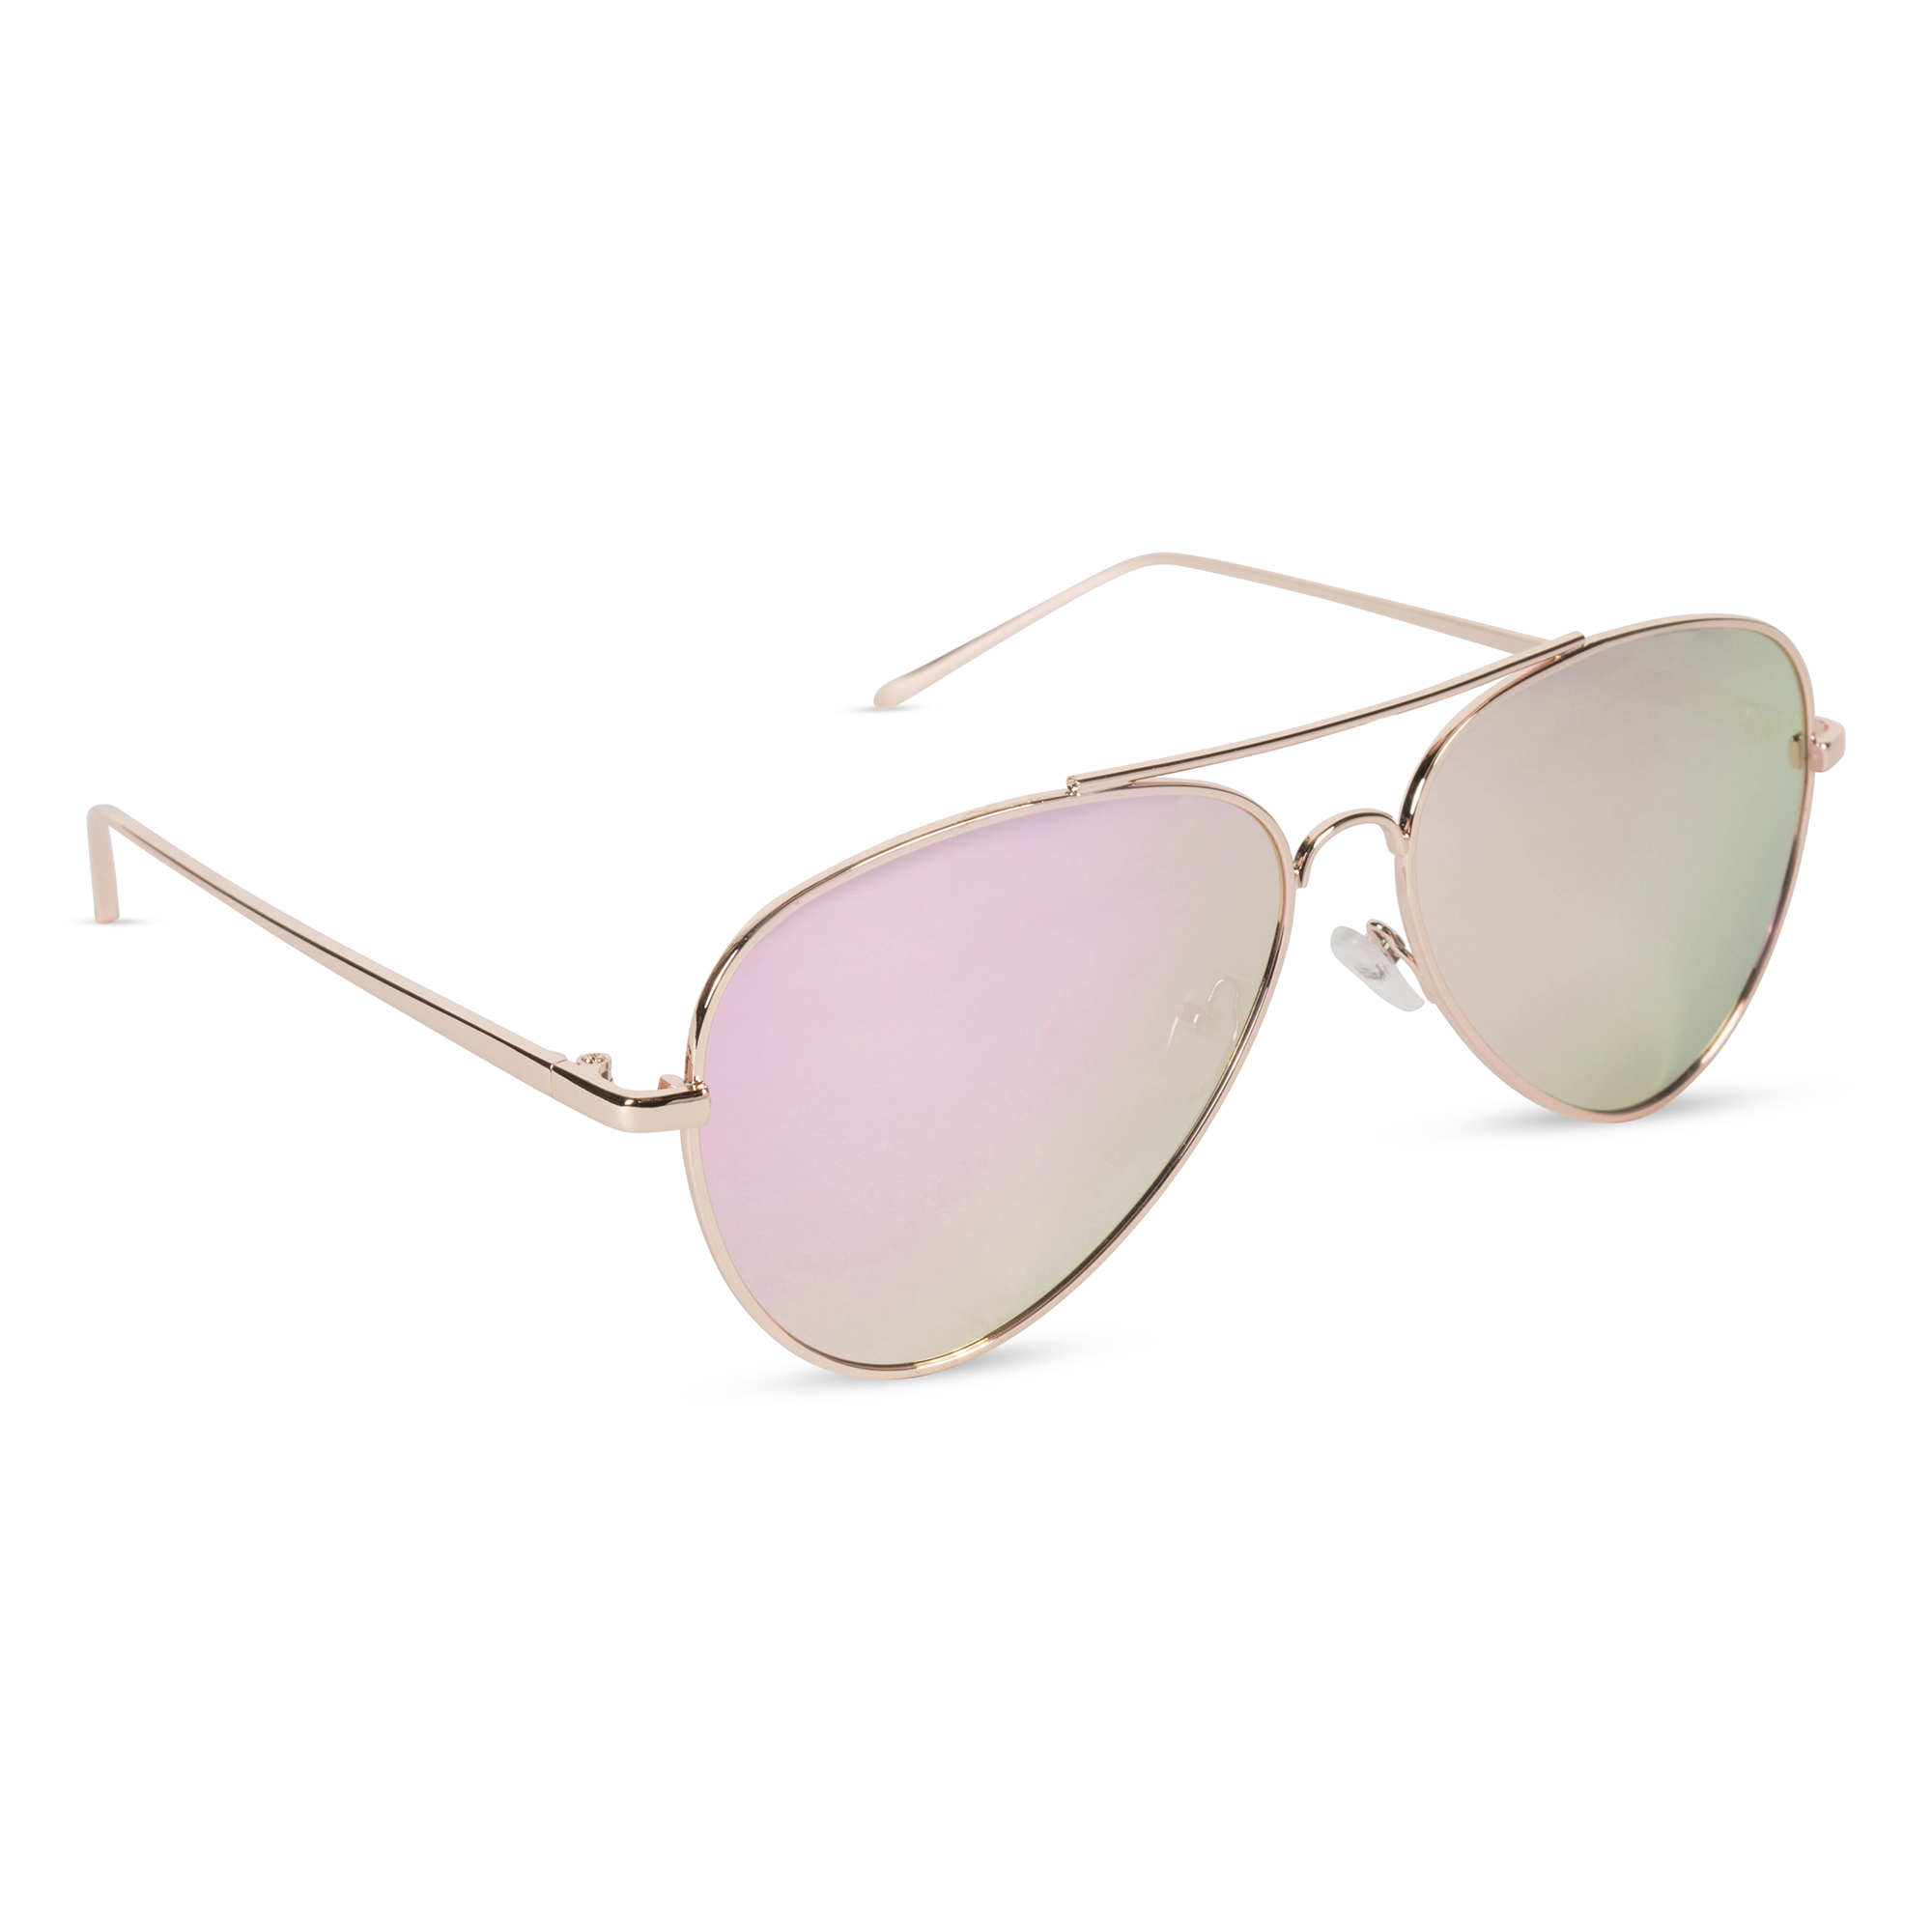 Inner Vision Military Style Aviator Sunglasses, Polarized & Revo Lens, Scratch Resistant, UV400 Protection With Case - Gold Frame, Pink Lens - image 1 of 8